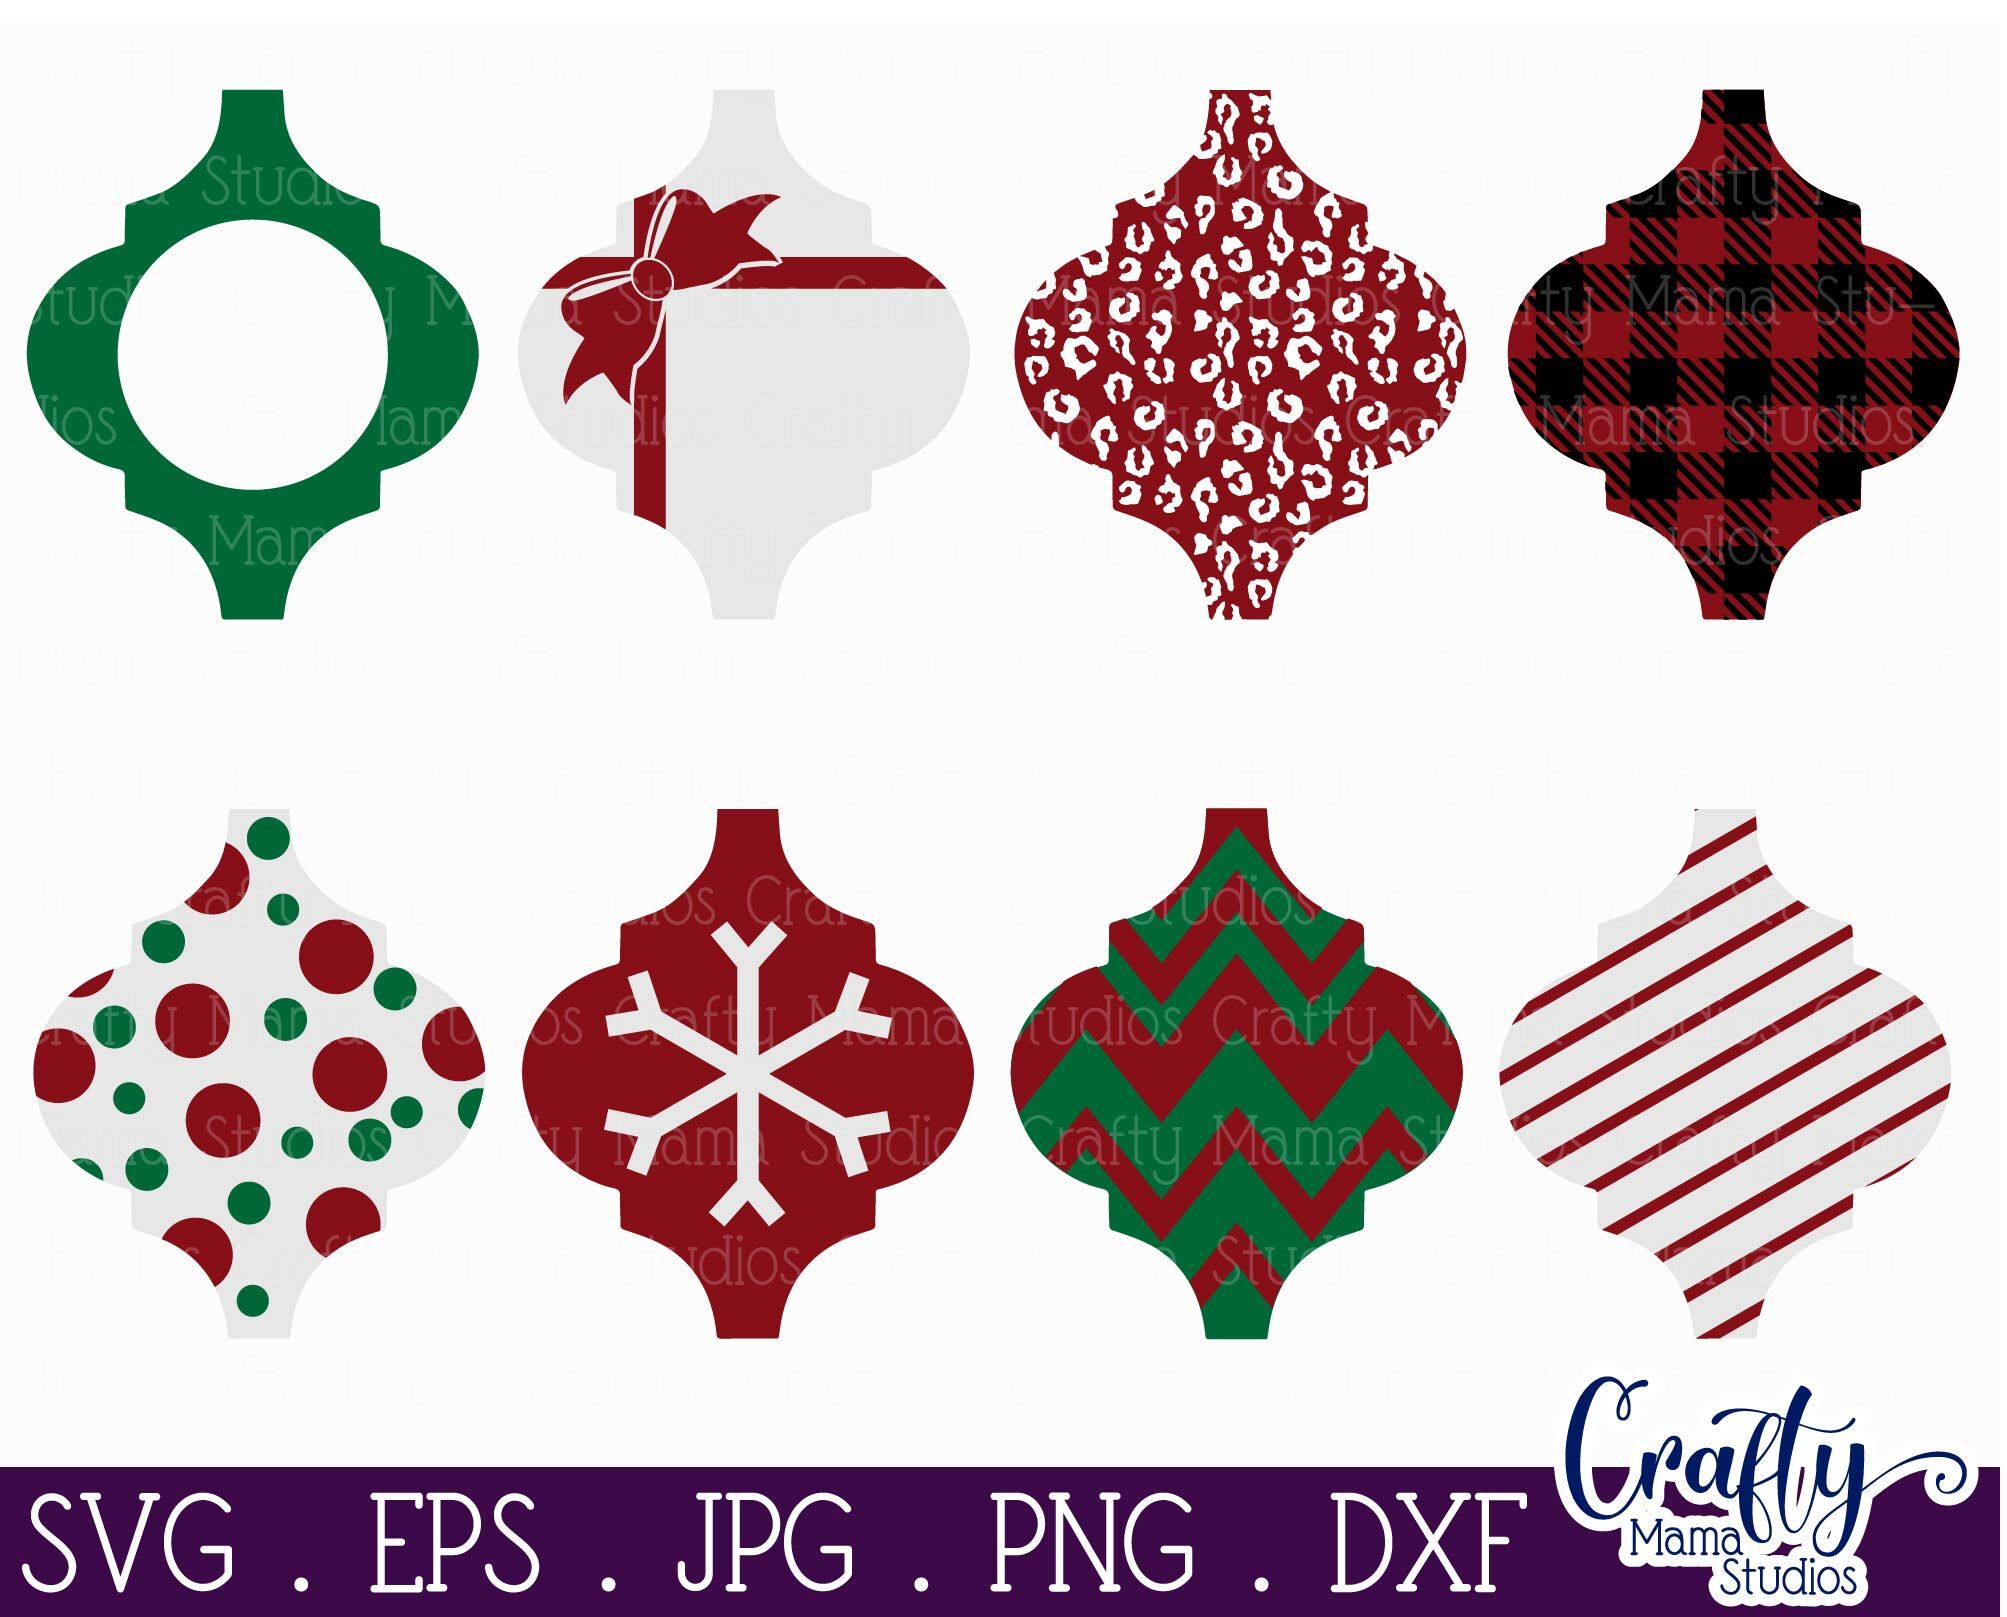 Download Arabesque Tile Ornament Svg Christmas Svg Patterned Svg By Crafty Mama Studios Thehungryjpeg Com